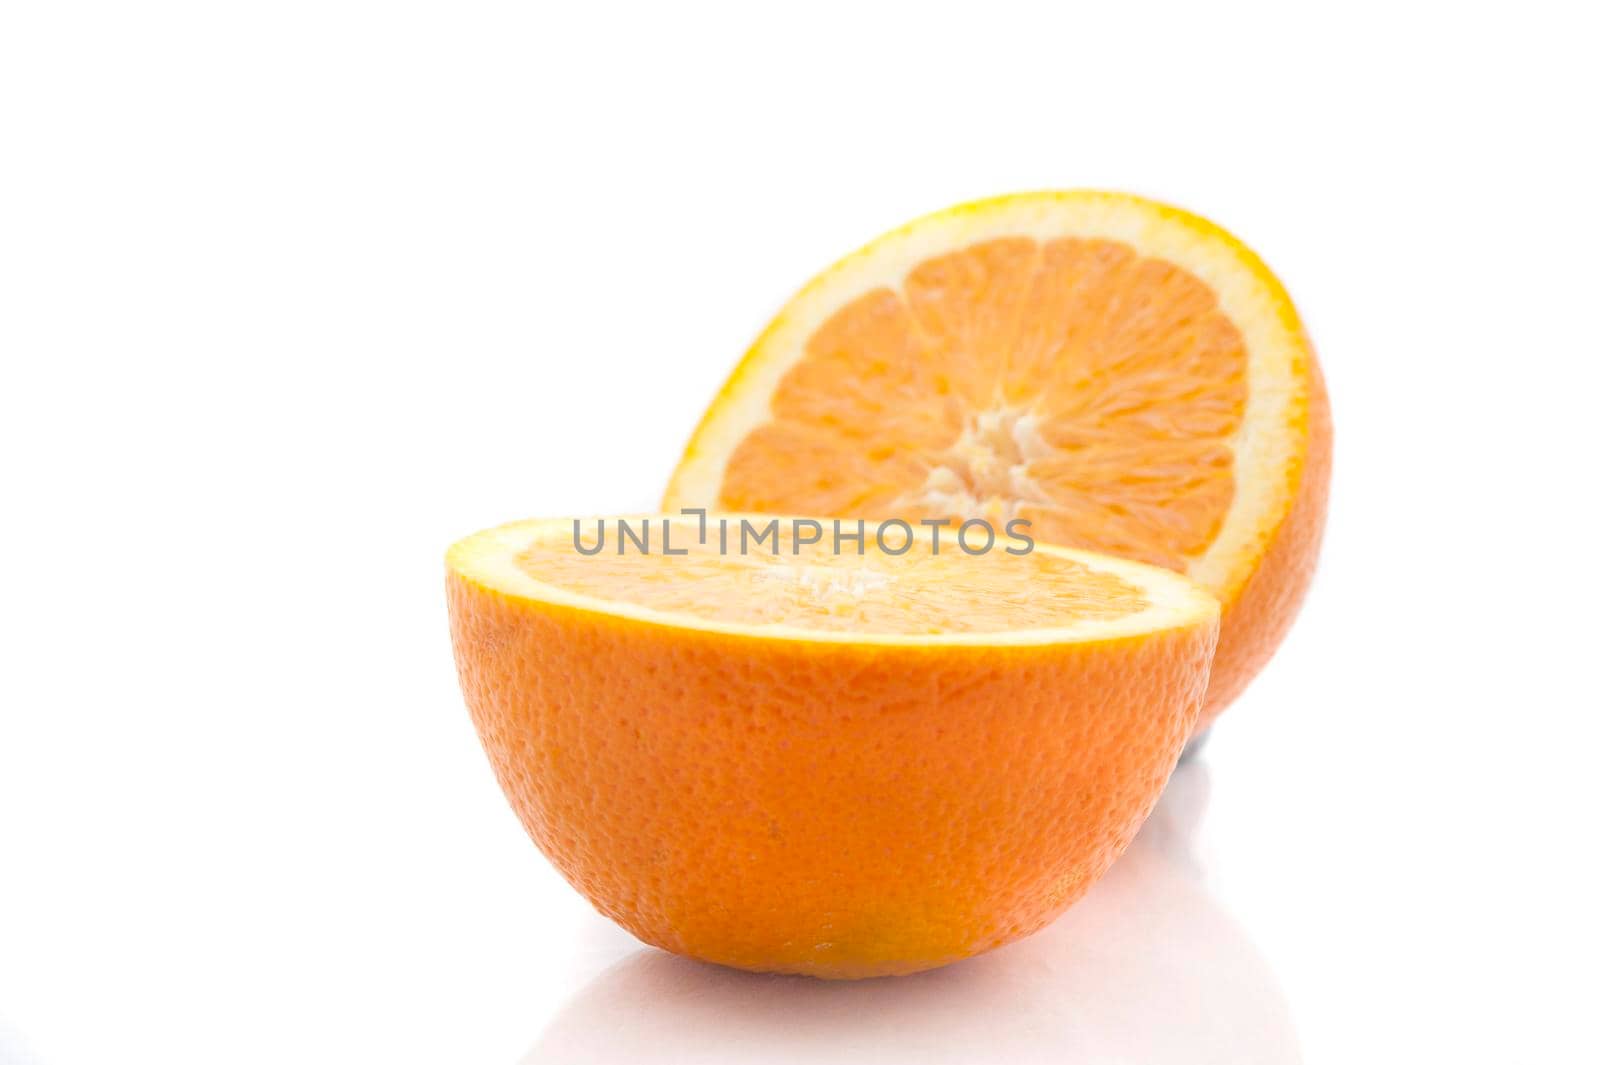 Ripe halved fresh orange showing the juicy pulp rich in vitamin c on a white background